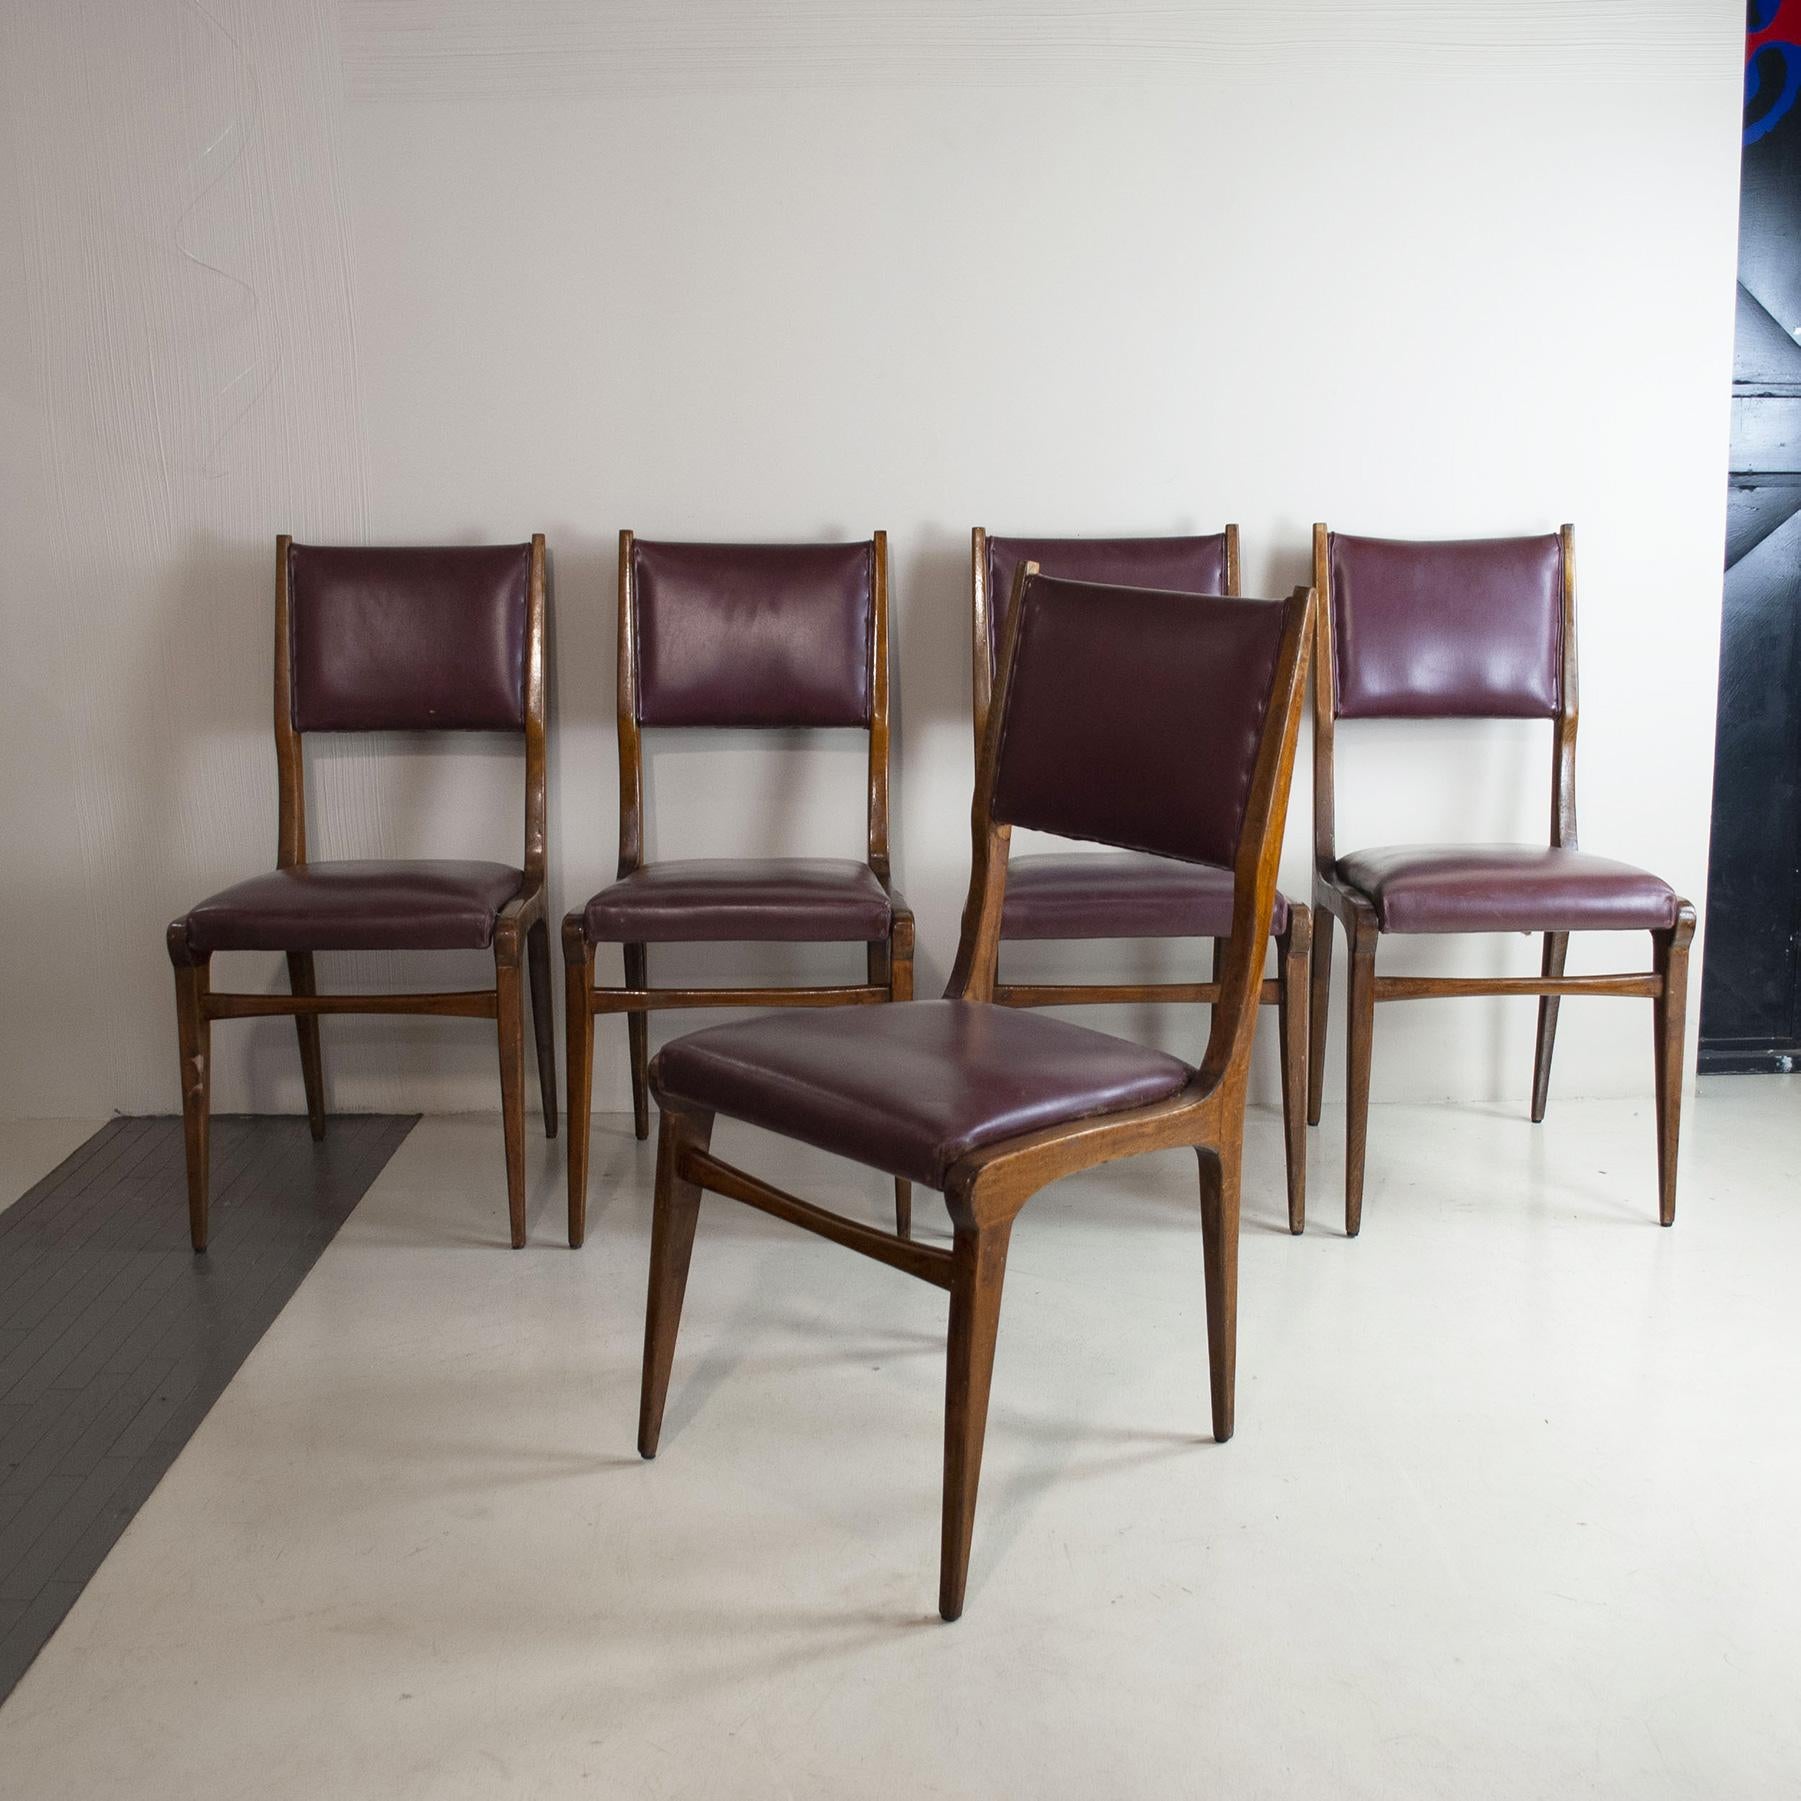 Carlo de Carli in the Style Italian Midcentury Chairs For Sale 1